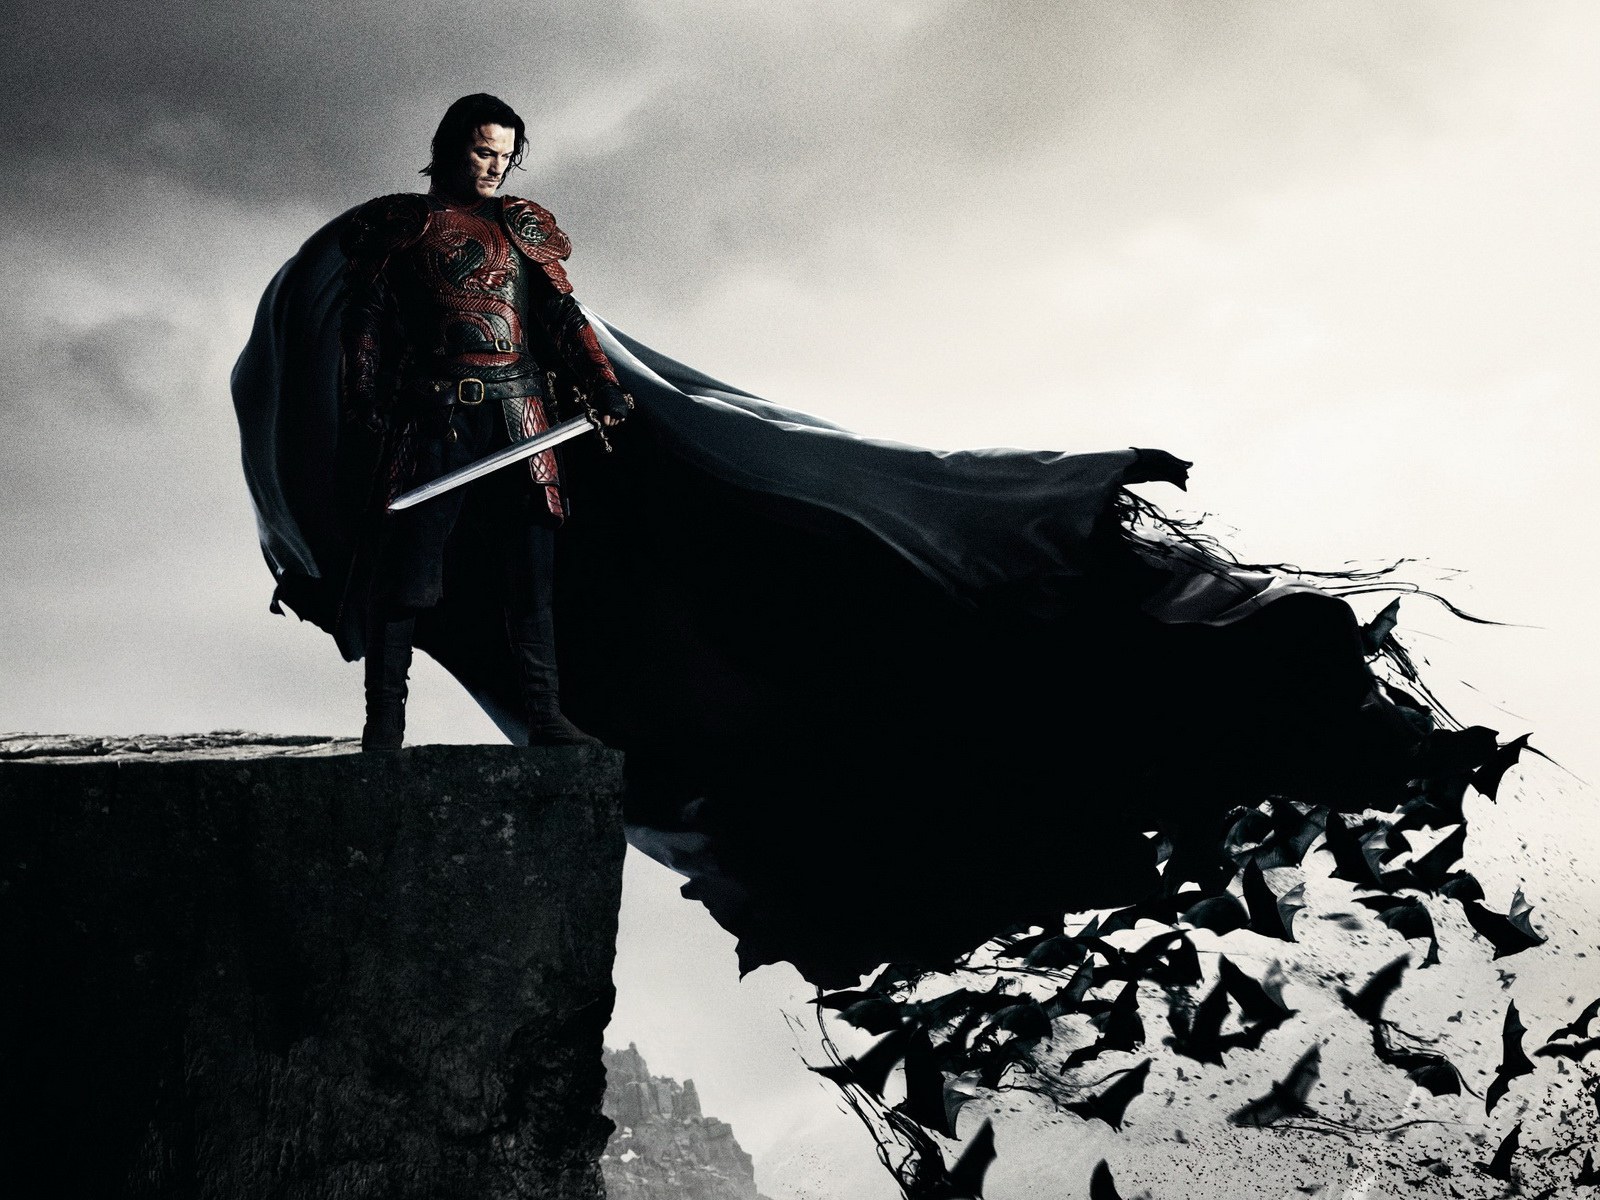 Draculauntold Dracula Untold In Theaters And Imax This